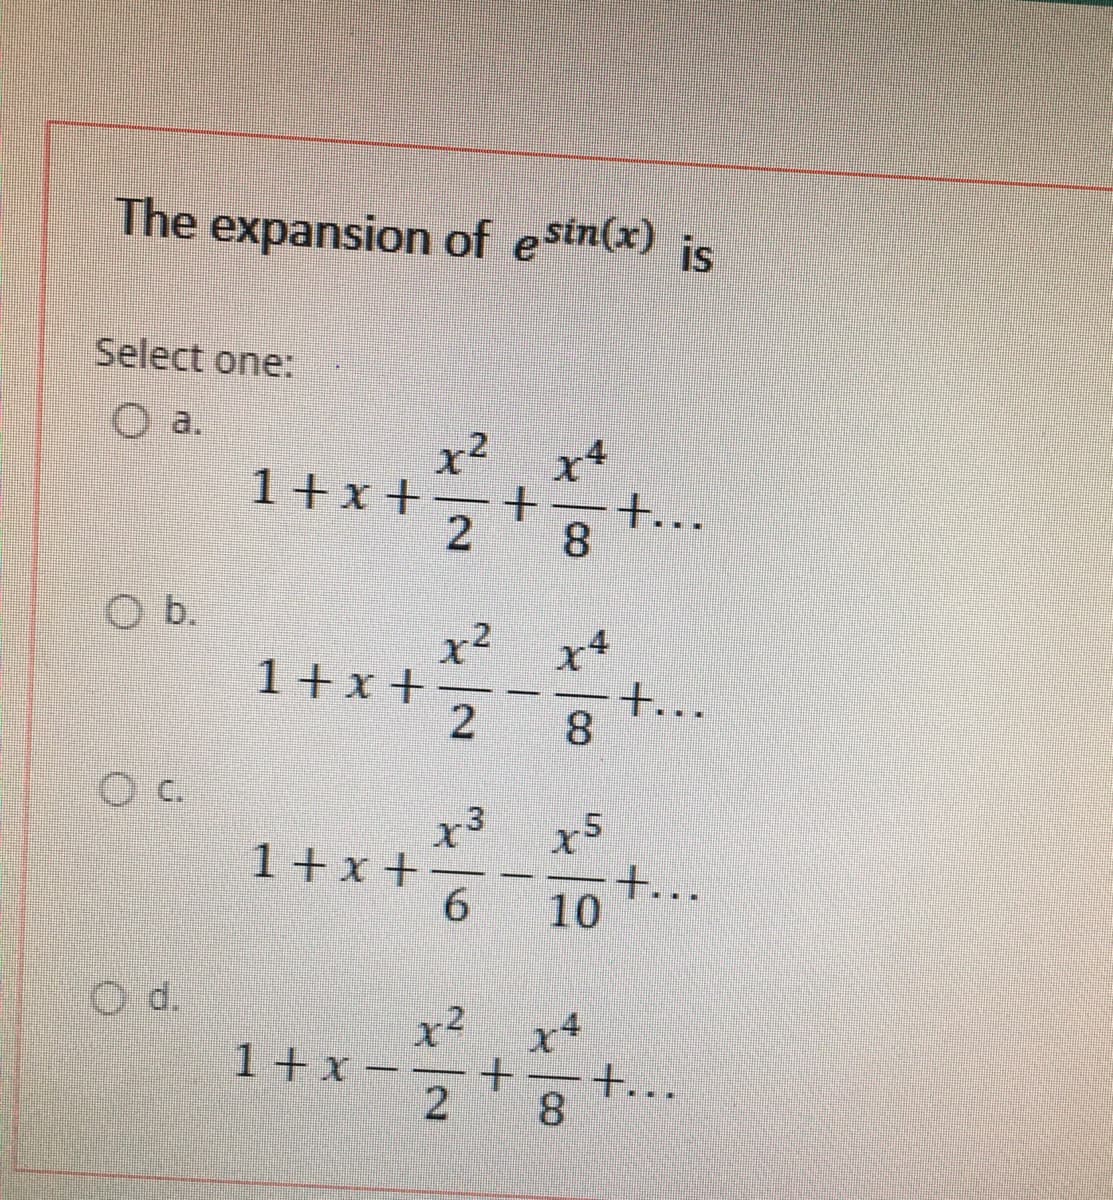 The expansion of eSin(x) is
Select one:
a.
x2
1+x+
2
x4
+...
8
b.
1+x +
t..
8
x3
1+x +
+...
10
Od.
1+x-
2
+..
8
